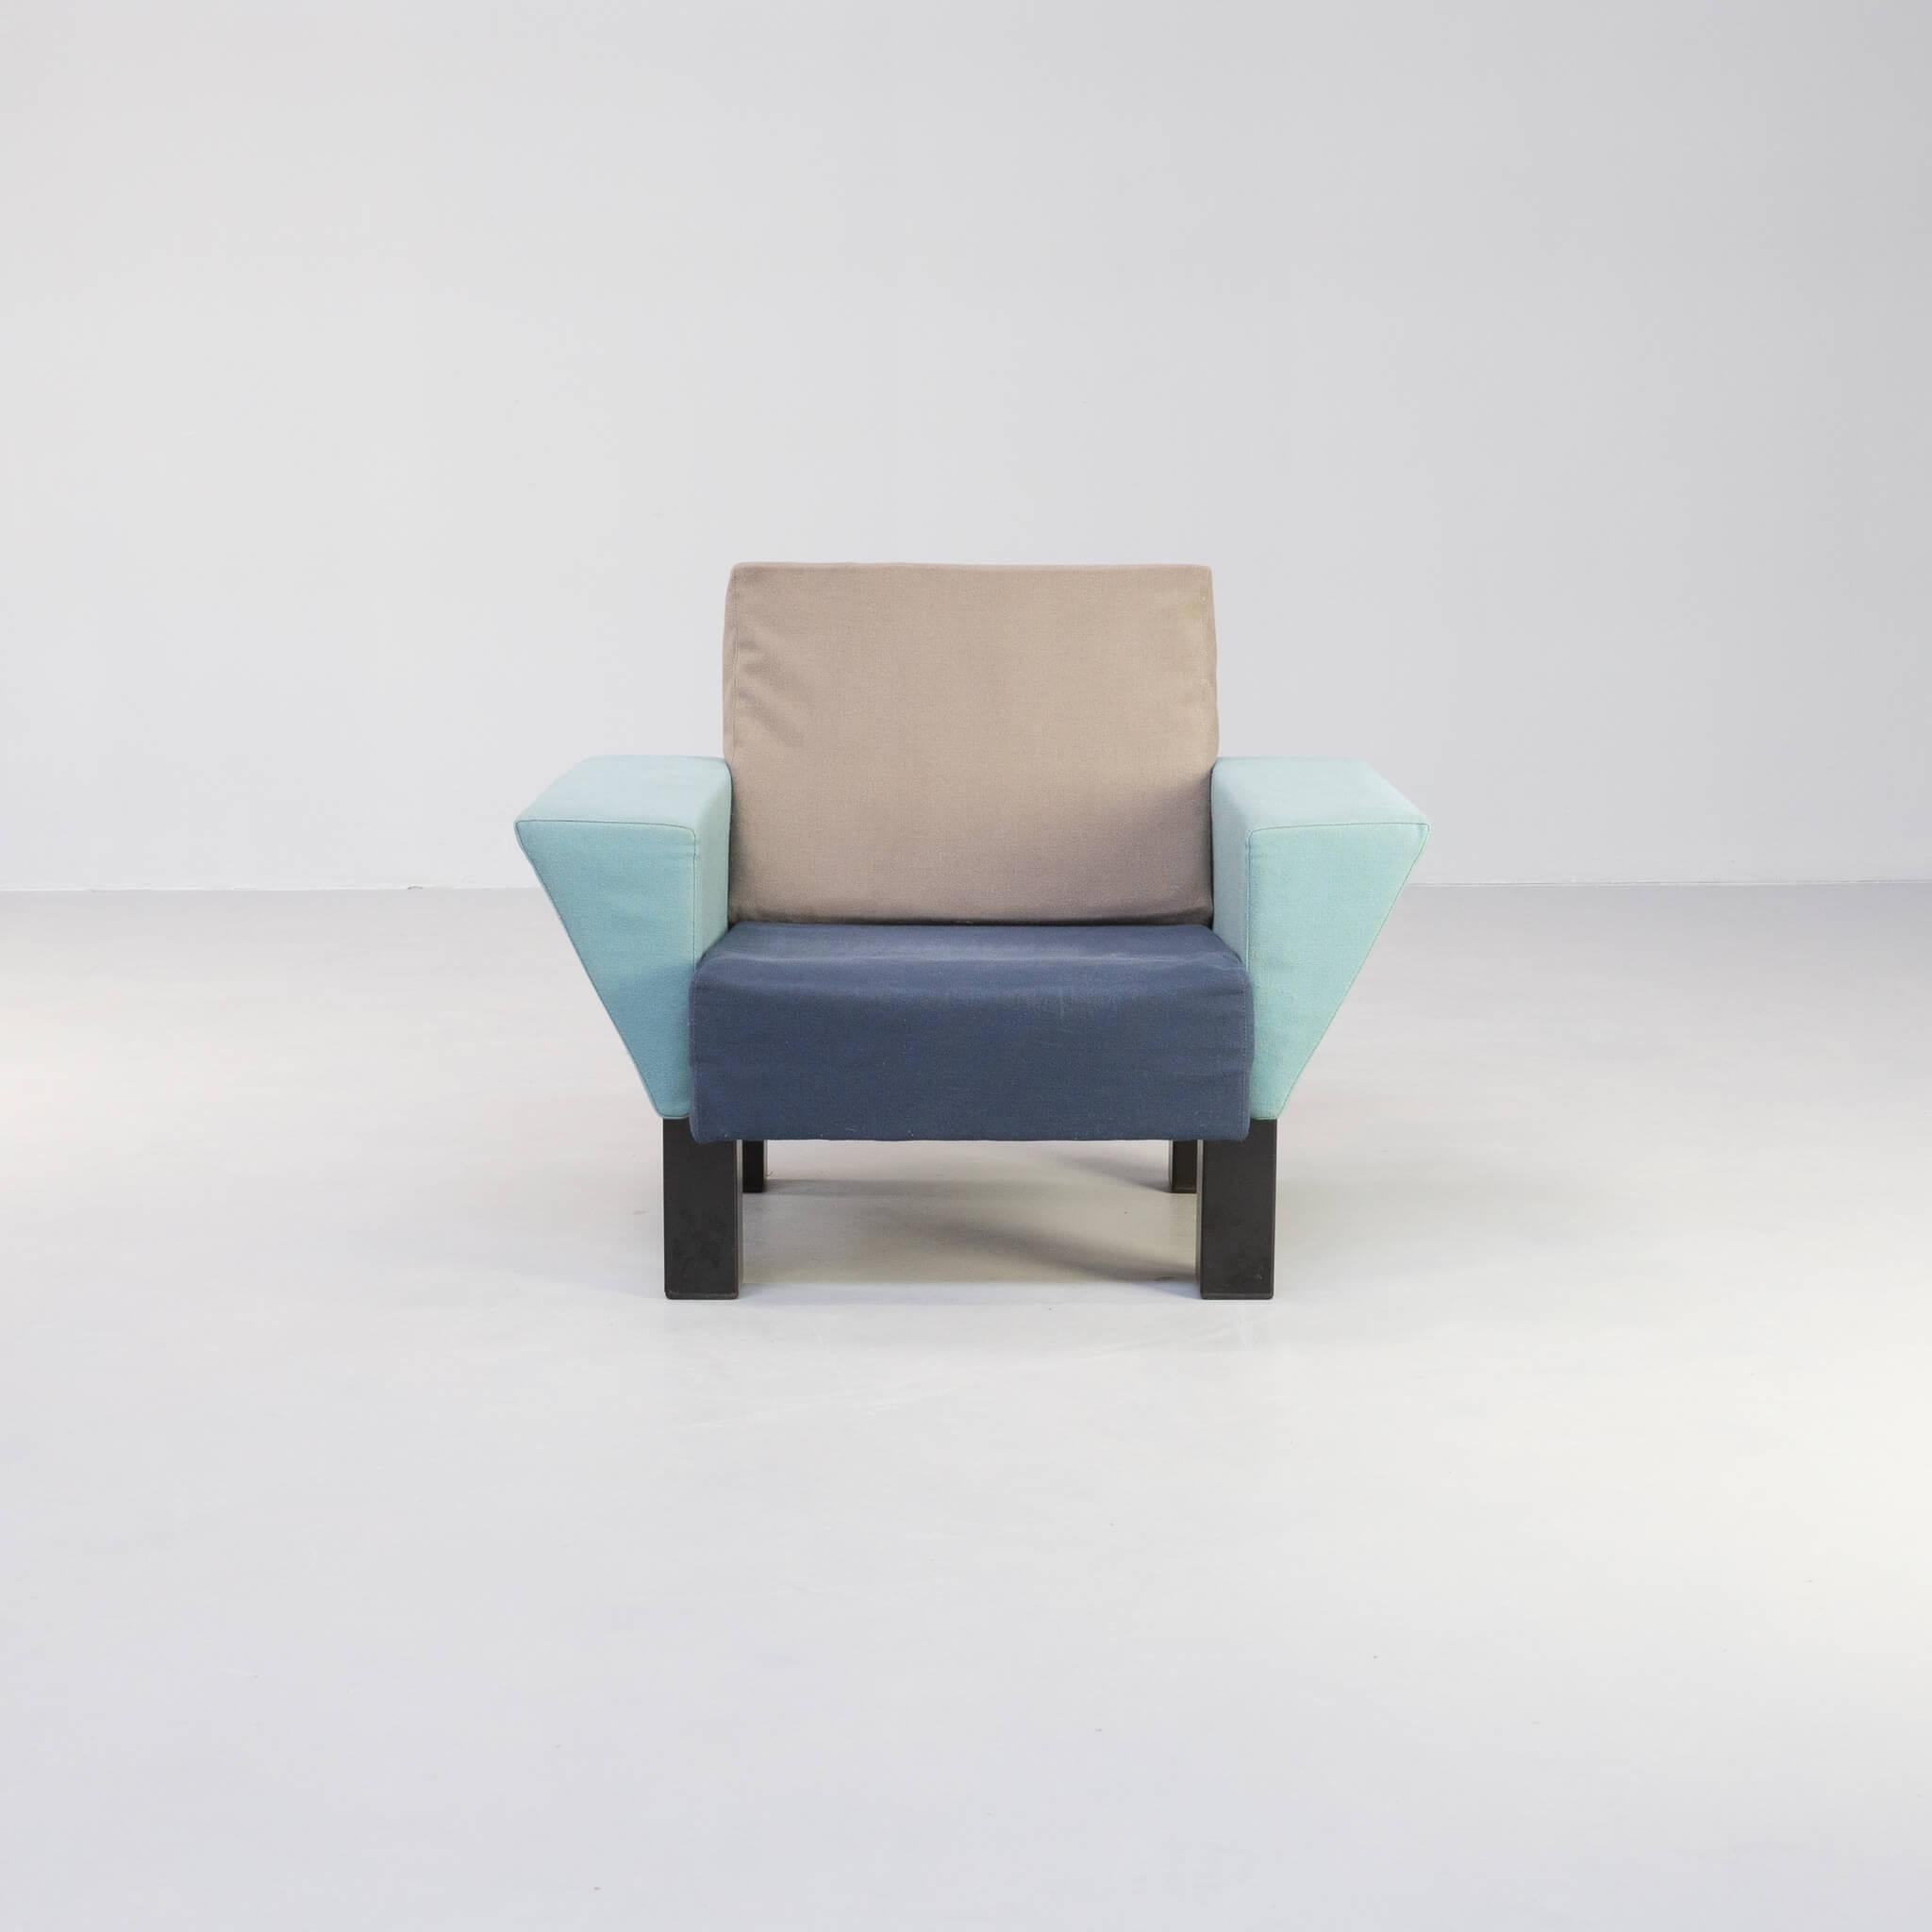 Ettore Sottsass ‘Westside’ armchair for Knoll is an Iconic design by Ettore Sottsass in 1983. This lounge chair has it’s original upholstery .
In 1983, two years after the founding of Memphis, Sottsass splintered off from his collective to partner